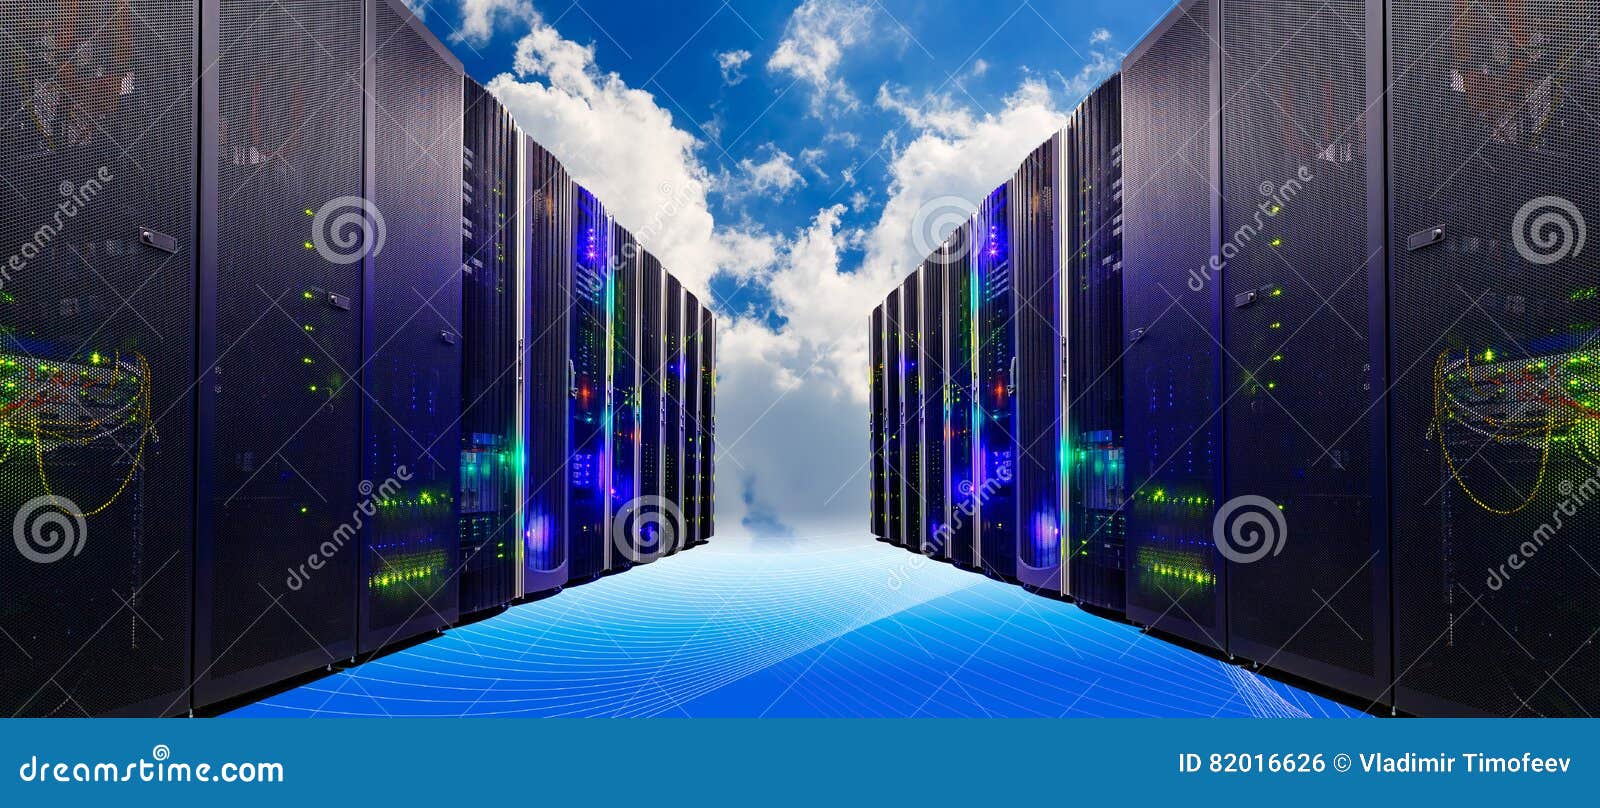 conceptual vision of datacenter on the cloud computing